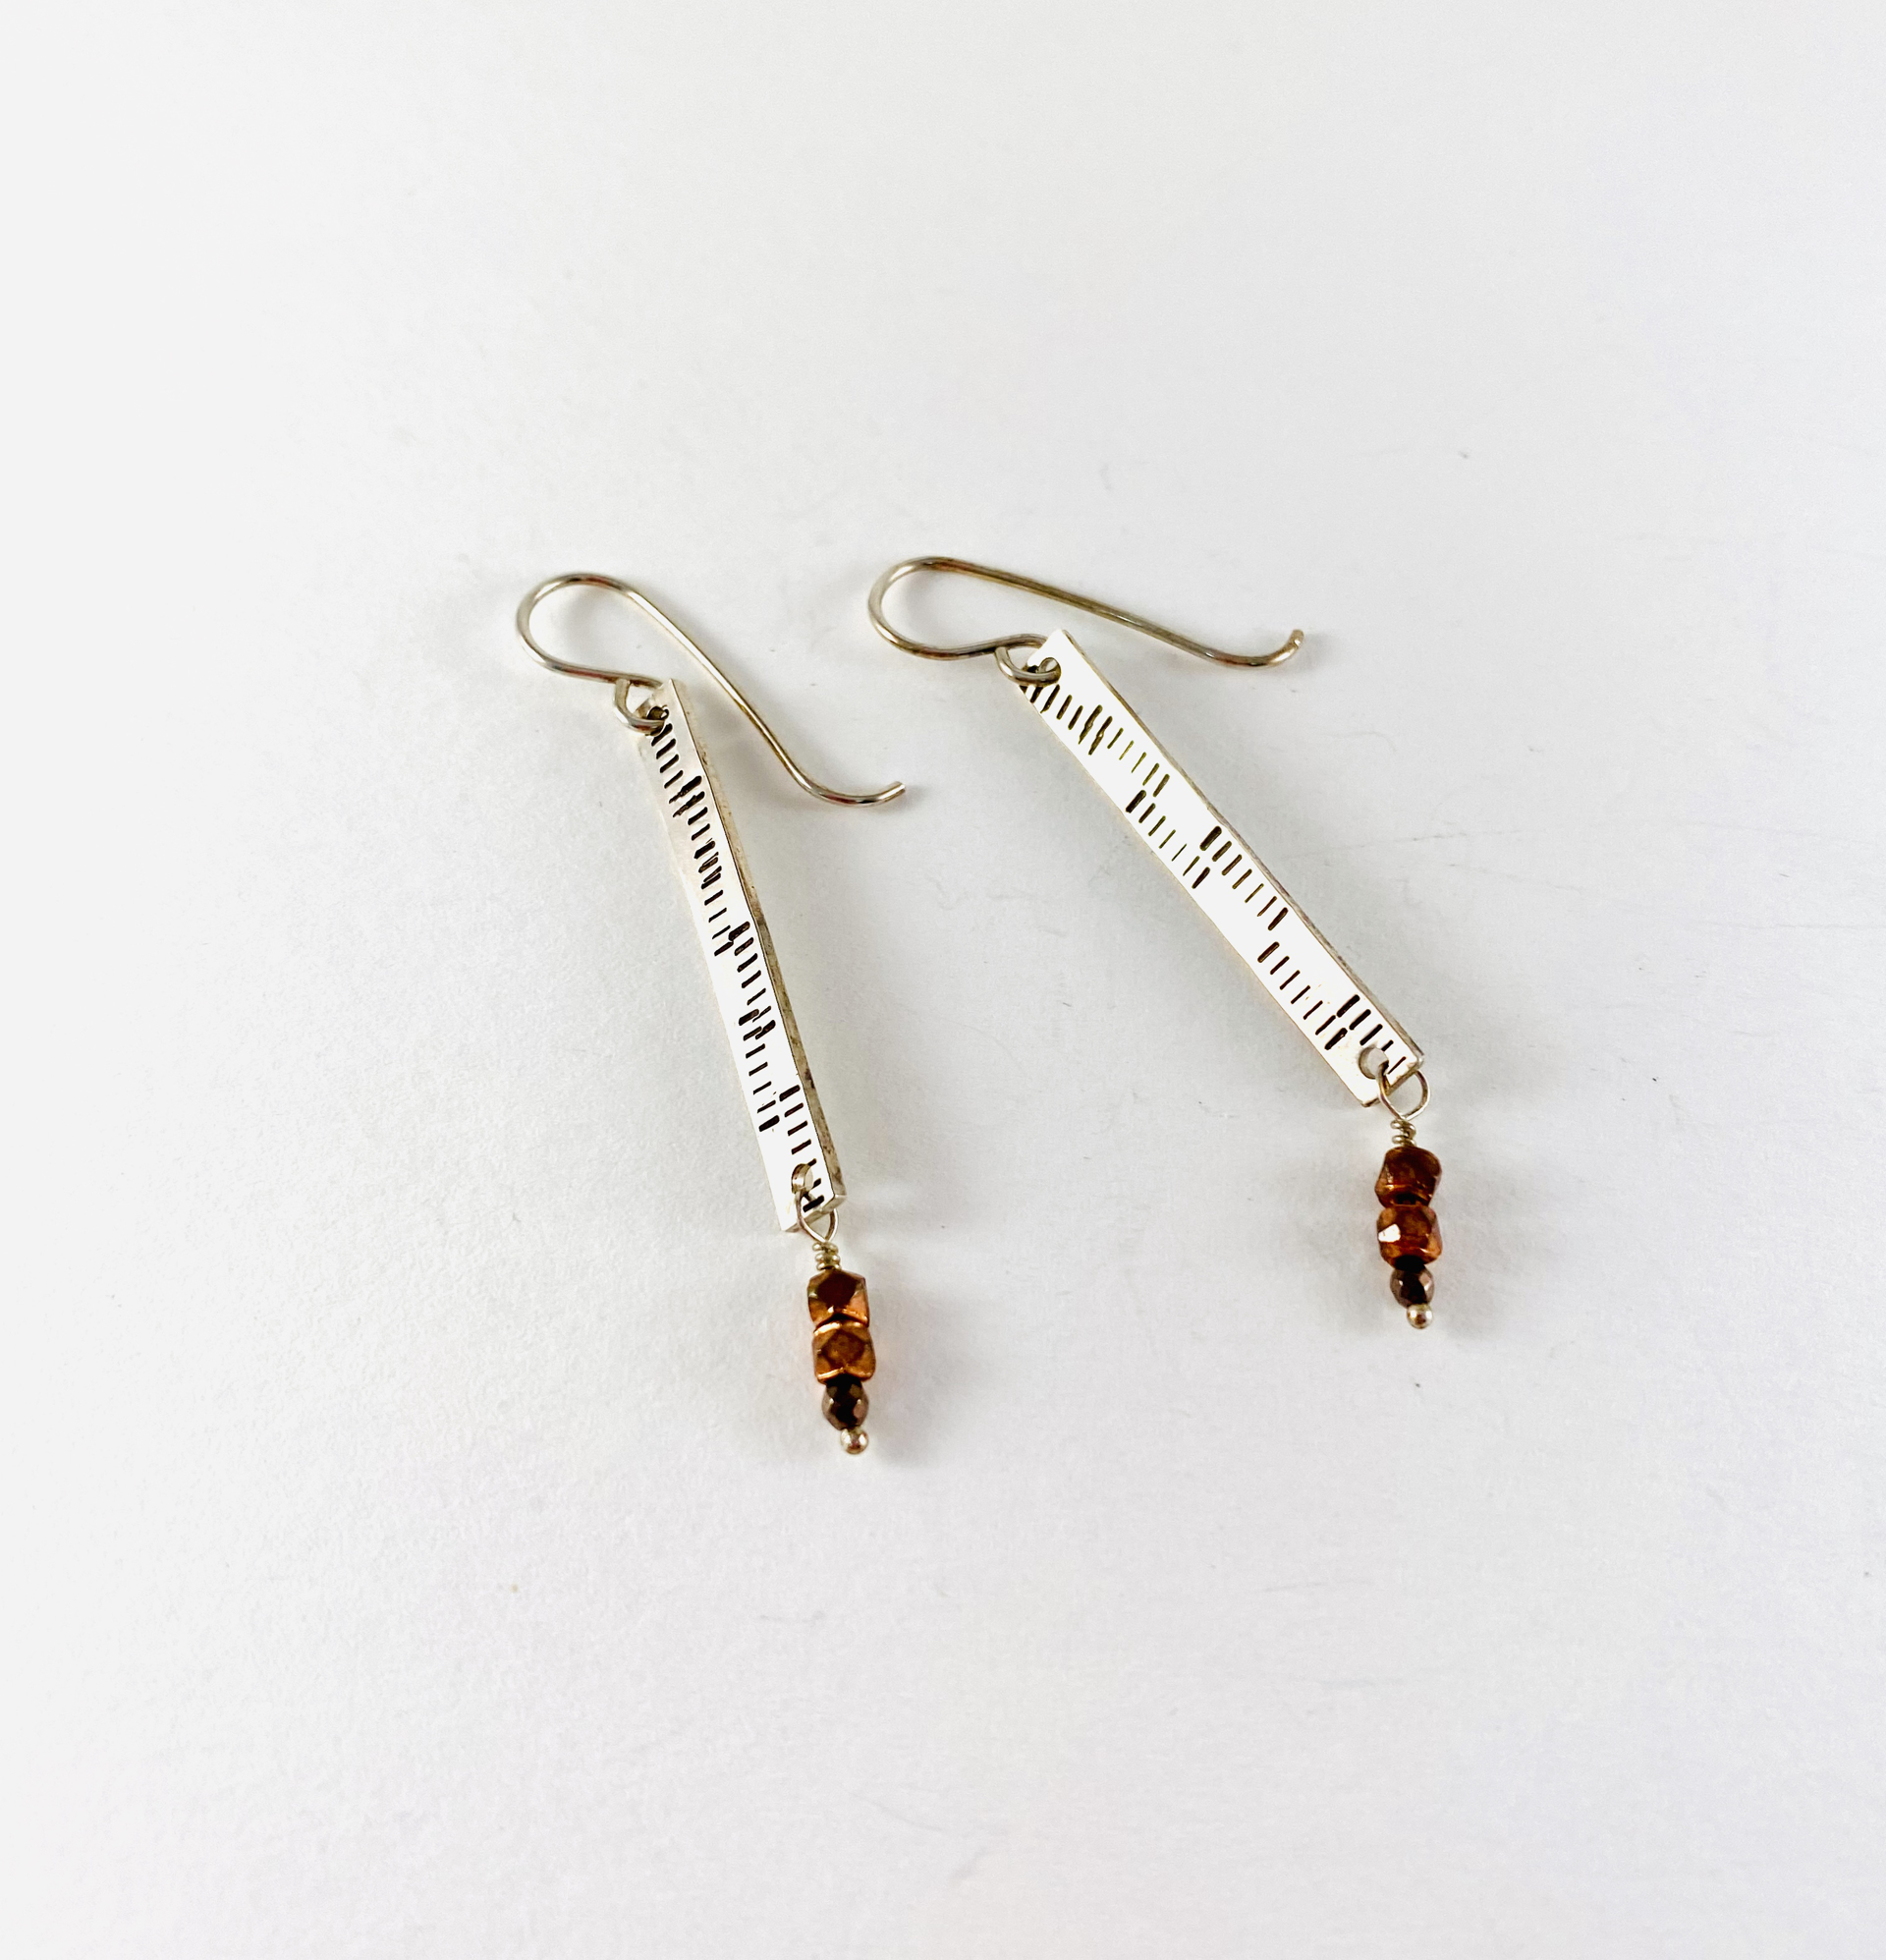 SL20-23 Silver Earrings with Copper bead accent by Shelby Lee - jewelry